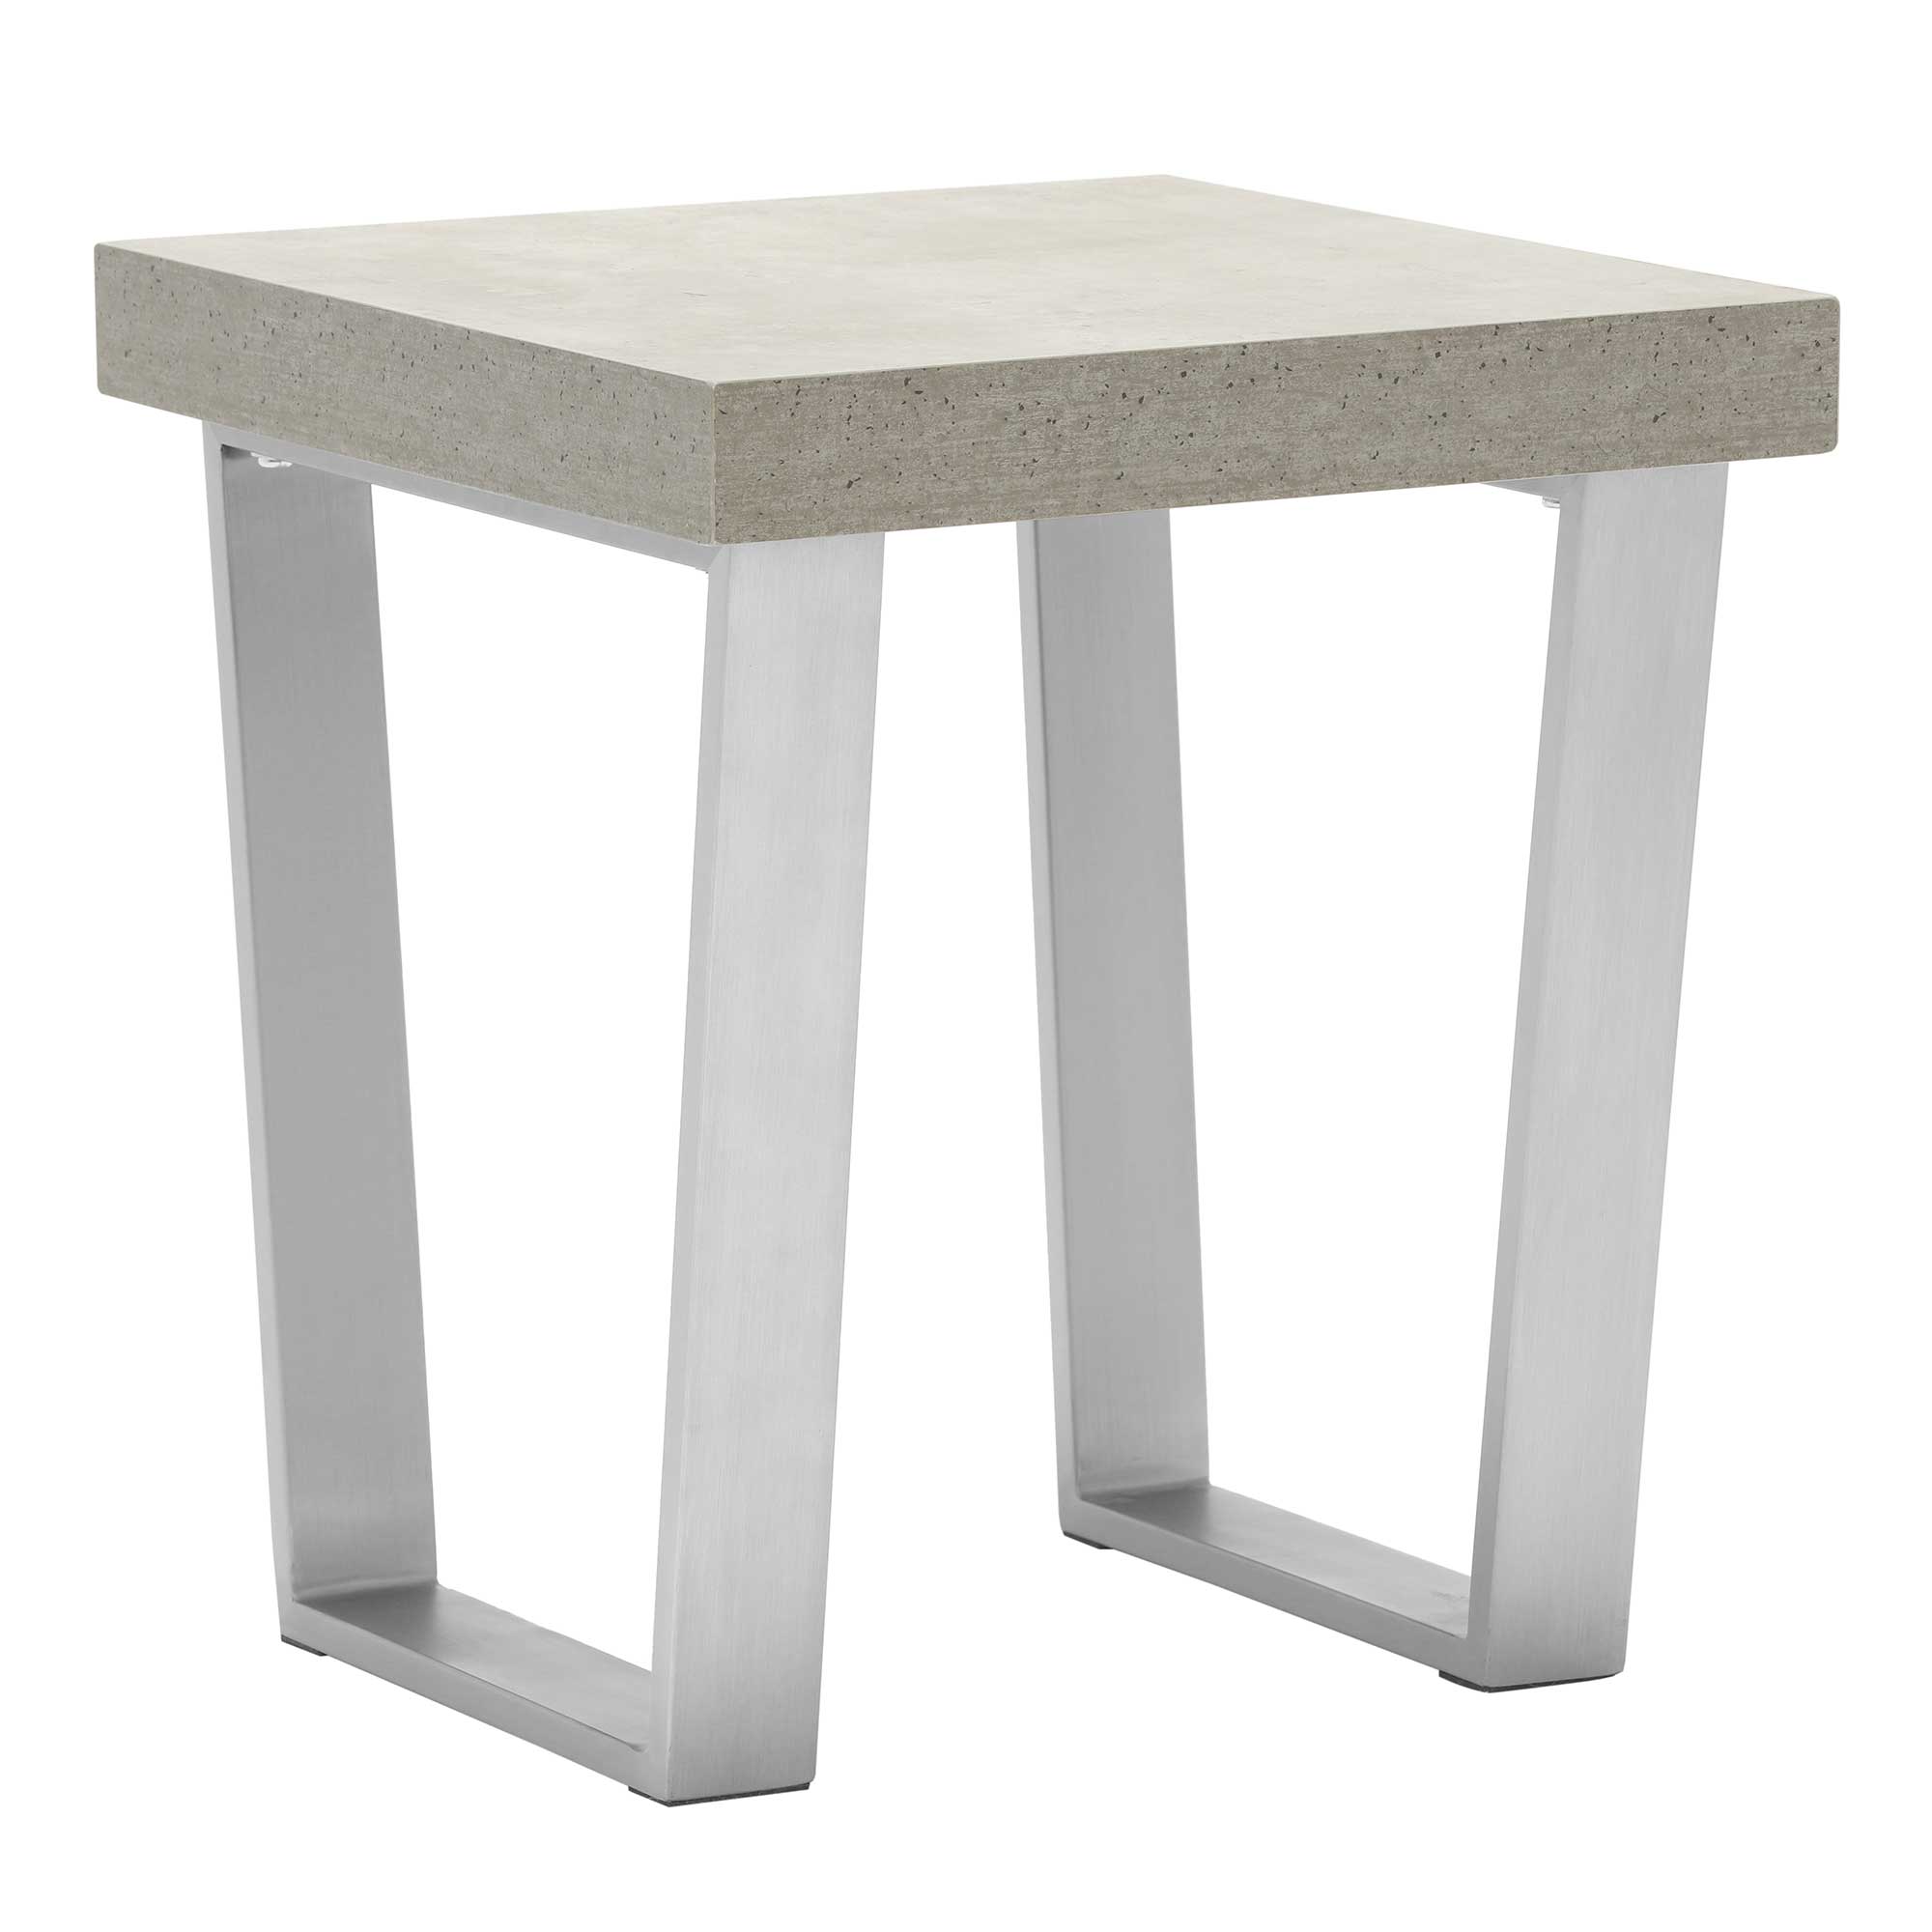 living room inch accent table small narrow end unique decor contemporary coffee tables target sofa height full size long side with drawers cool home card concrete outdoor and